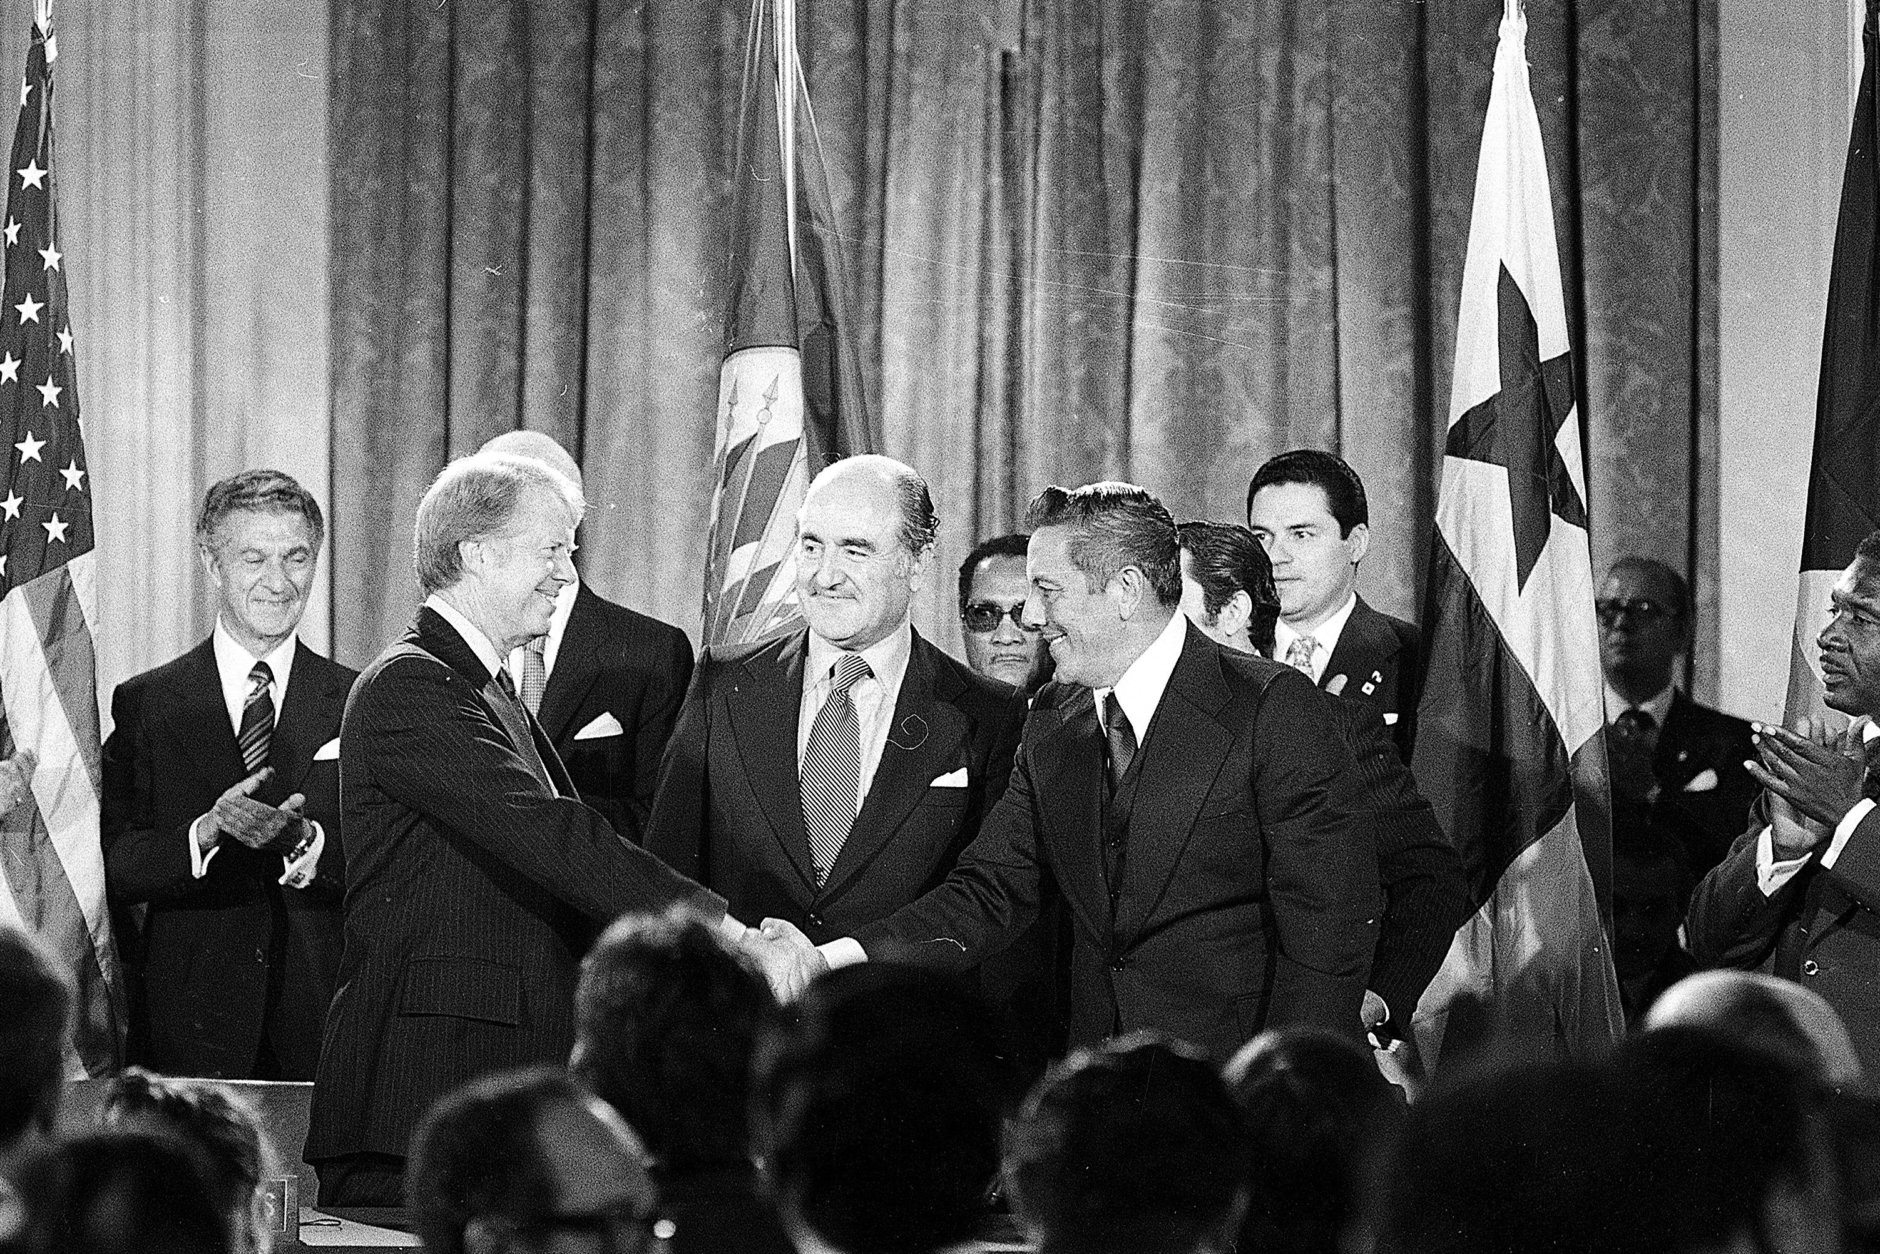 President Jimmy Carter shakes hands with Panama's head of government Omar Torrijos in Washington Sept. 7, 1977 after they signed the Panama Canal treaty.  Secretary General Alejandro Orfila stands at center.  (AP Photo)